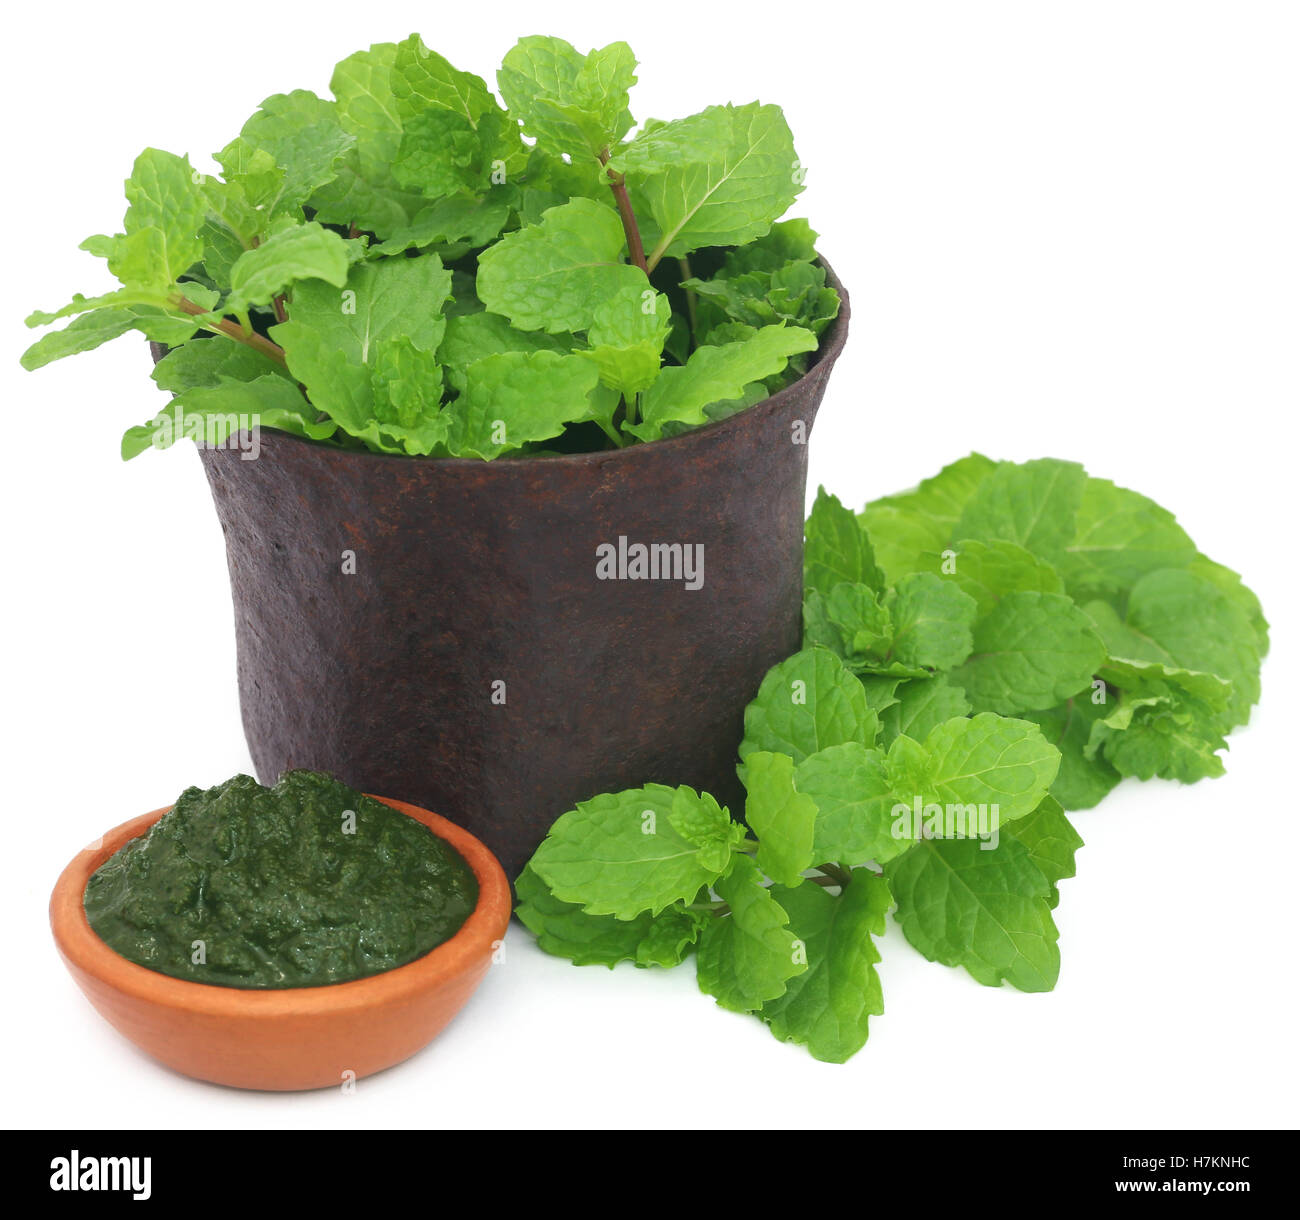 Bunch of mint leaves in a mortar with ground paste in a pottery overw white background Stock Photo